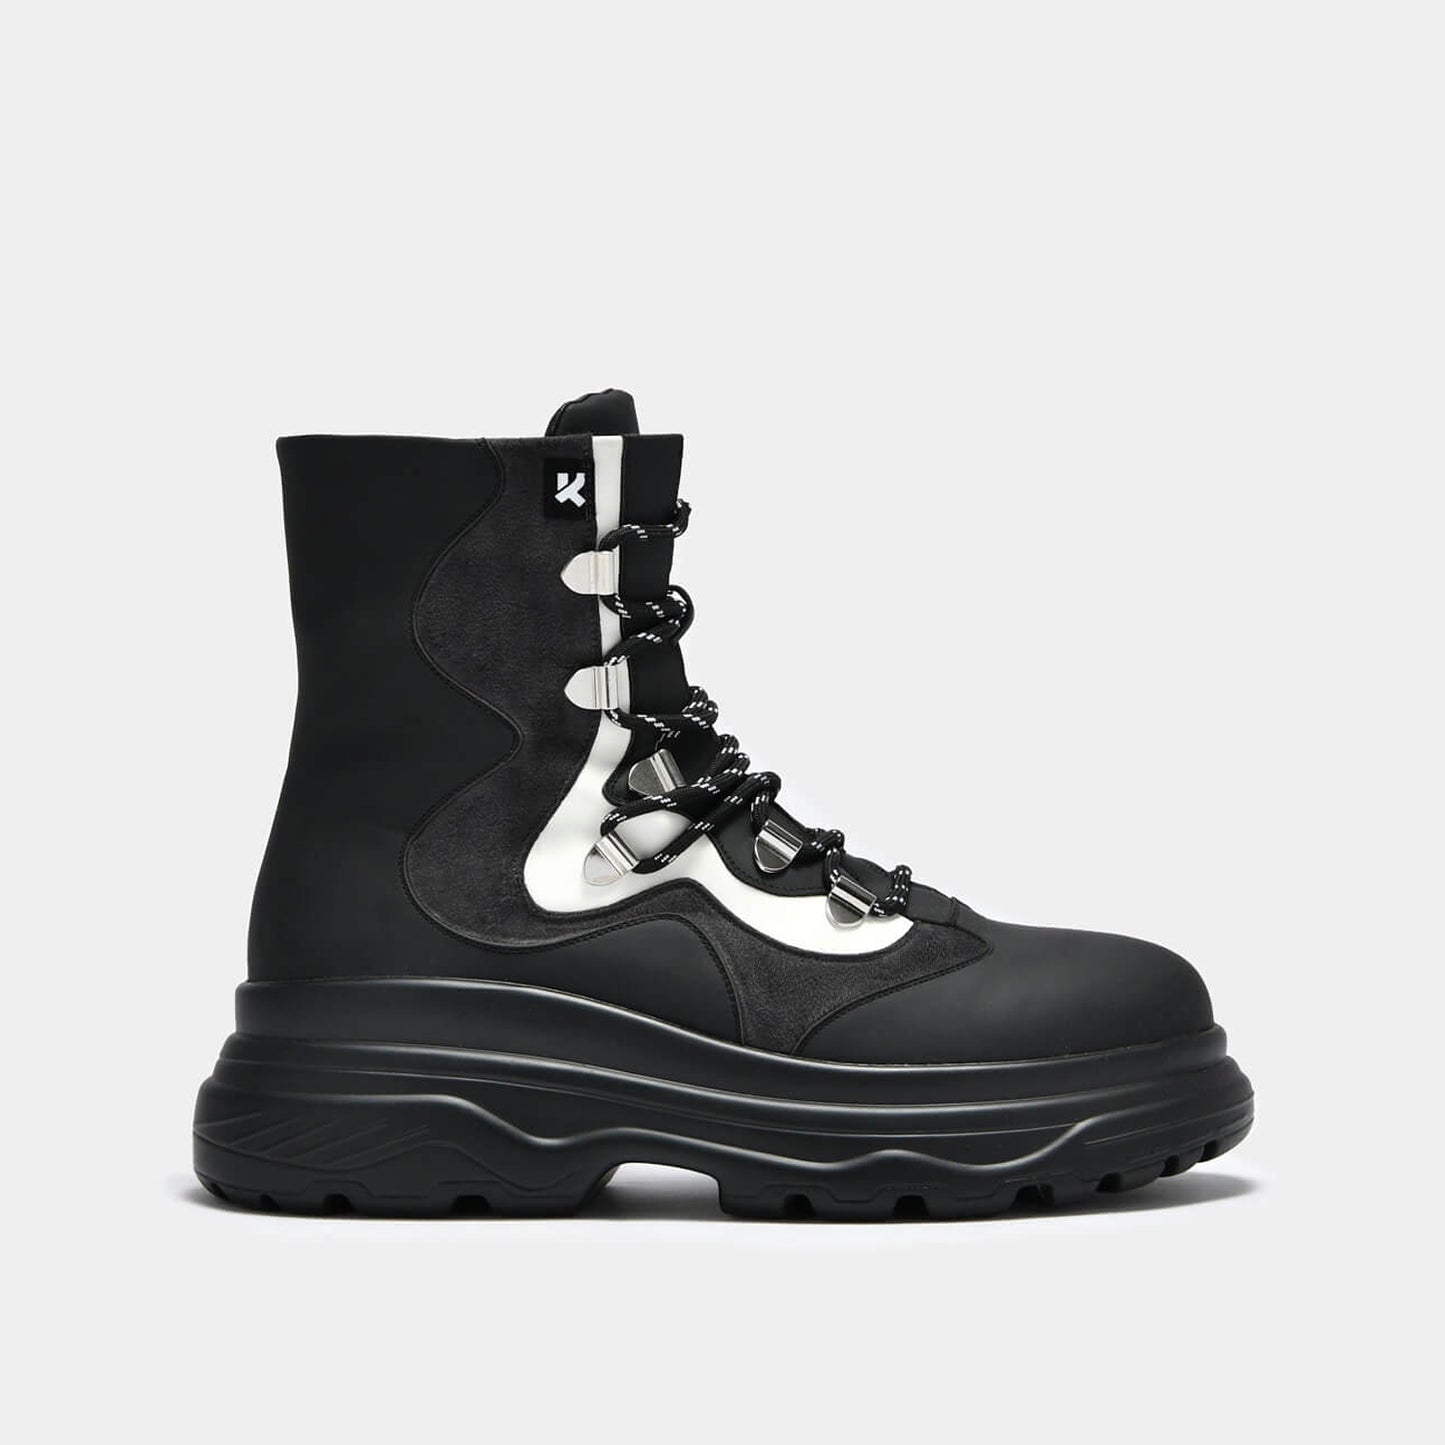 The KSI Men's Trail Boots - Ankle Boots - KOI Footwear - Black - Side View